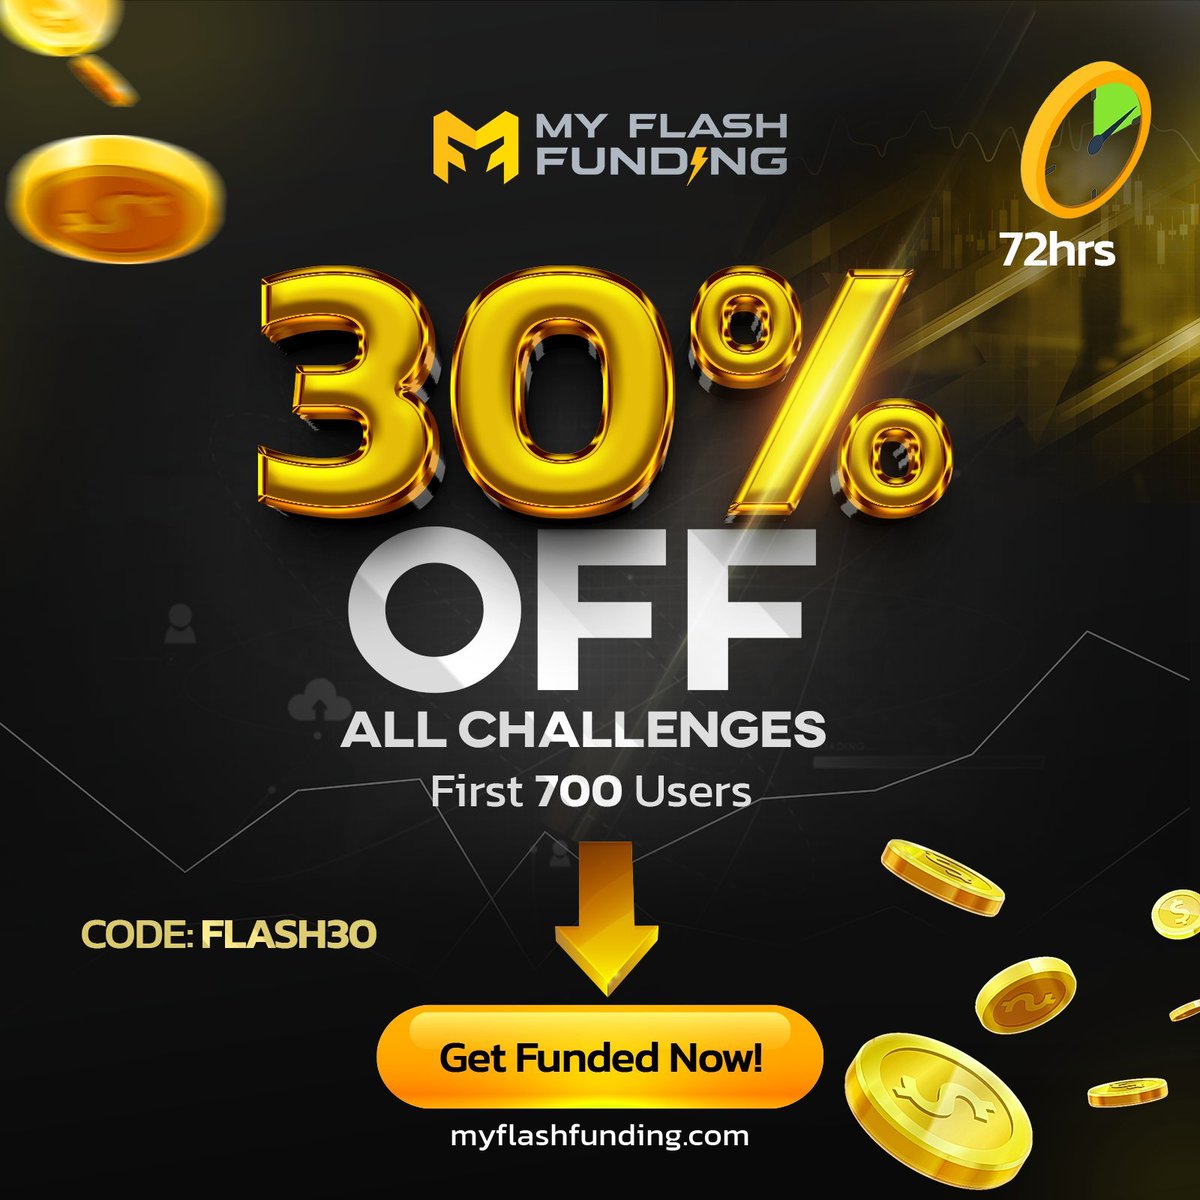 Hurry! Grab a 30% DISCOUNT before it disappears! Extended till May 13th ⚡️ Use Code: FLASH30 Don't miss out on this limited-time funding opportunity! 👉 myflashfunding.com